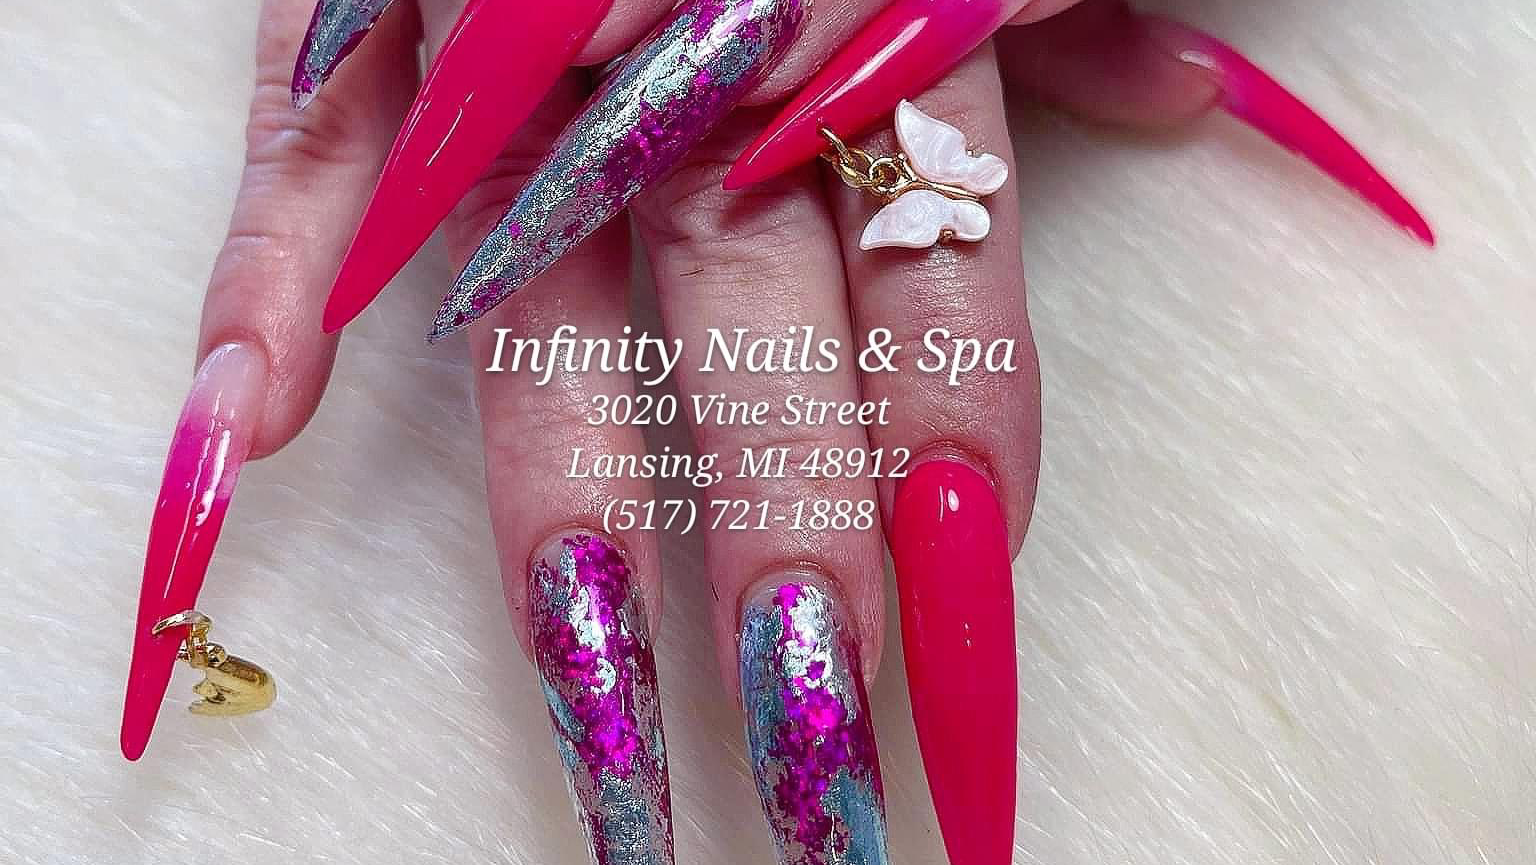 INFINITY NAILS AND SPA